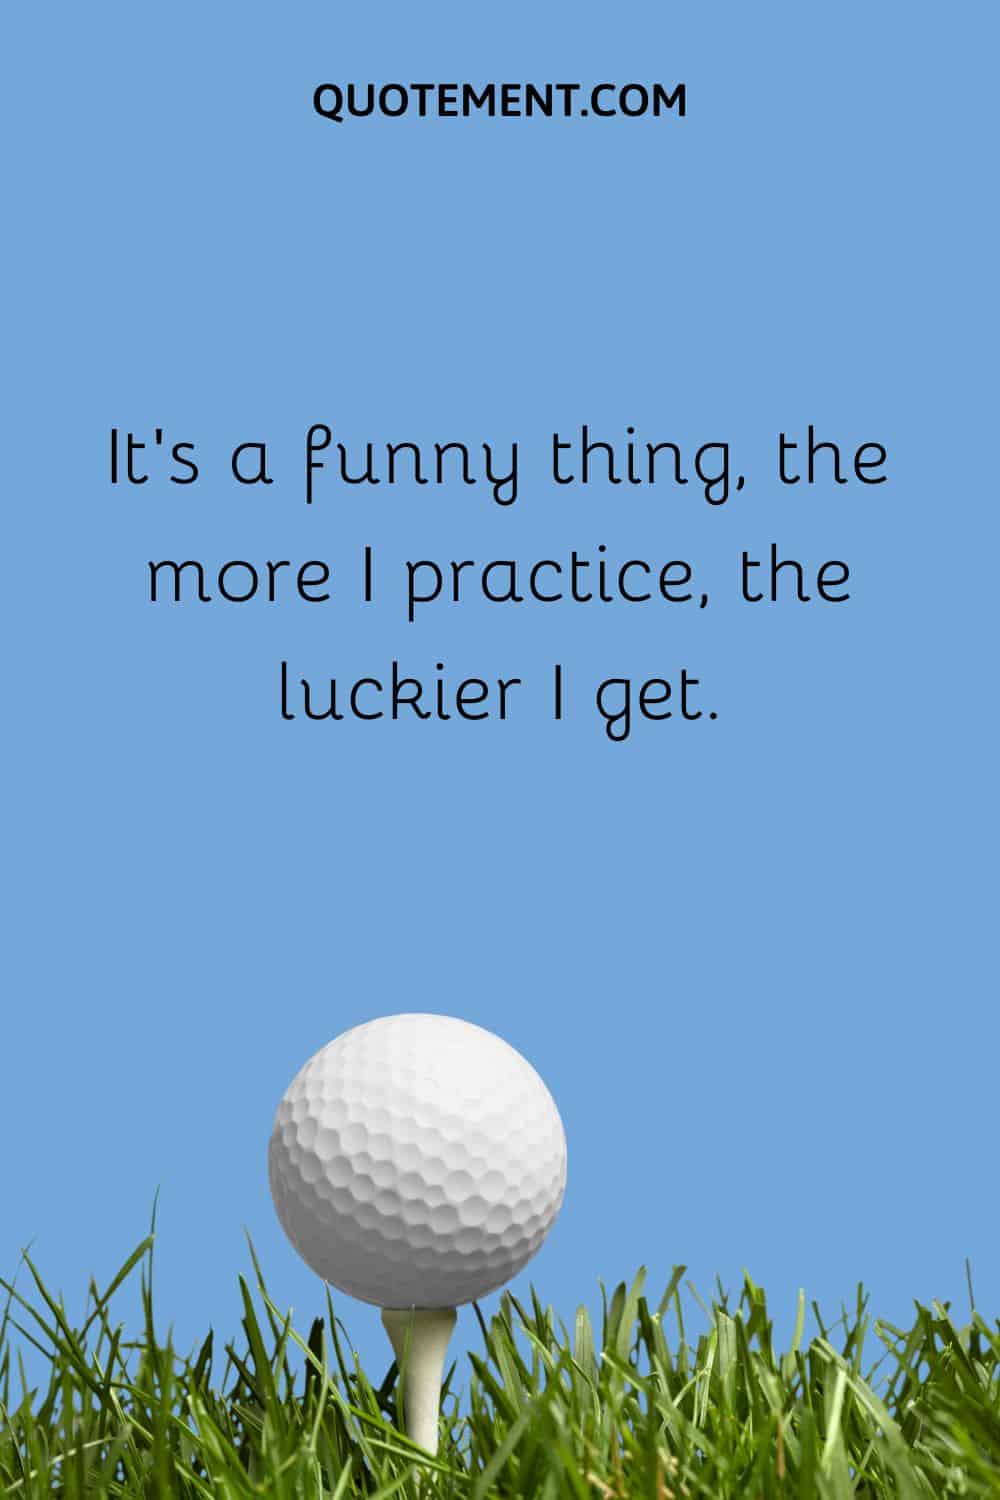 It’s a funny thing, the more I practice, the luckier I get